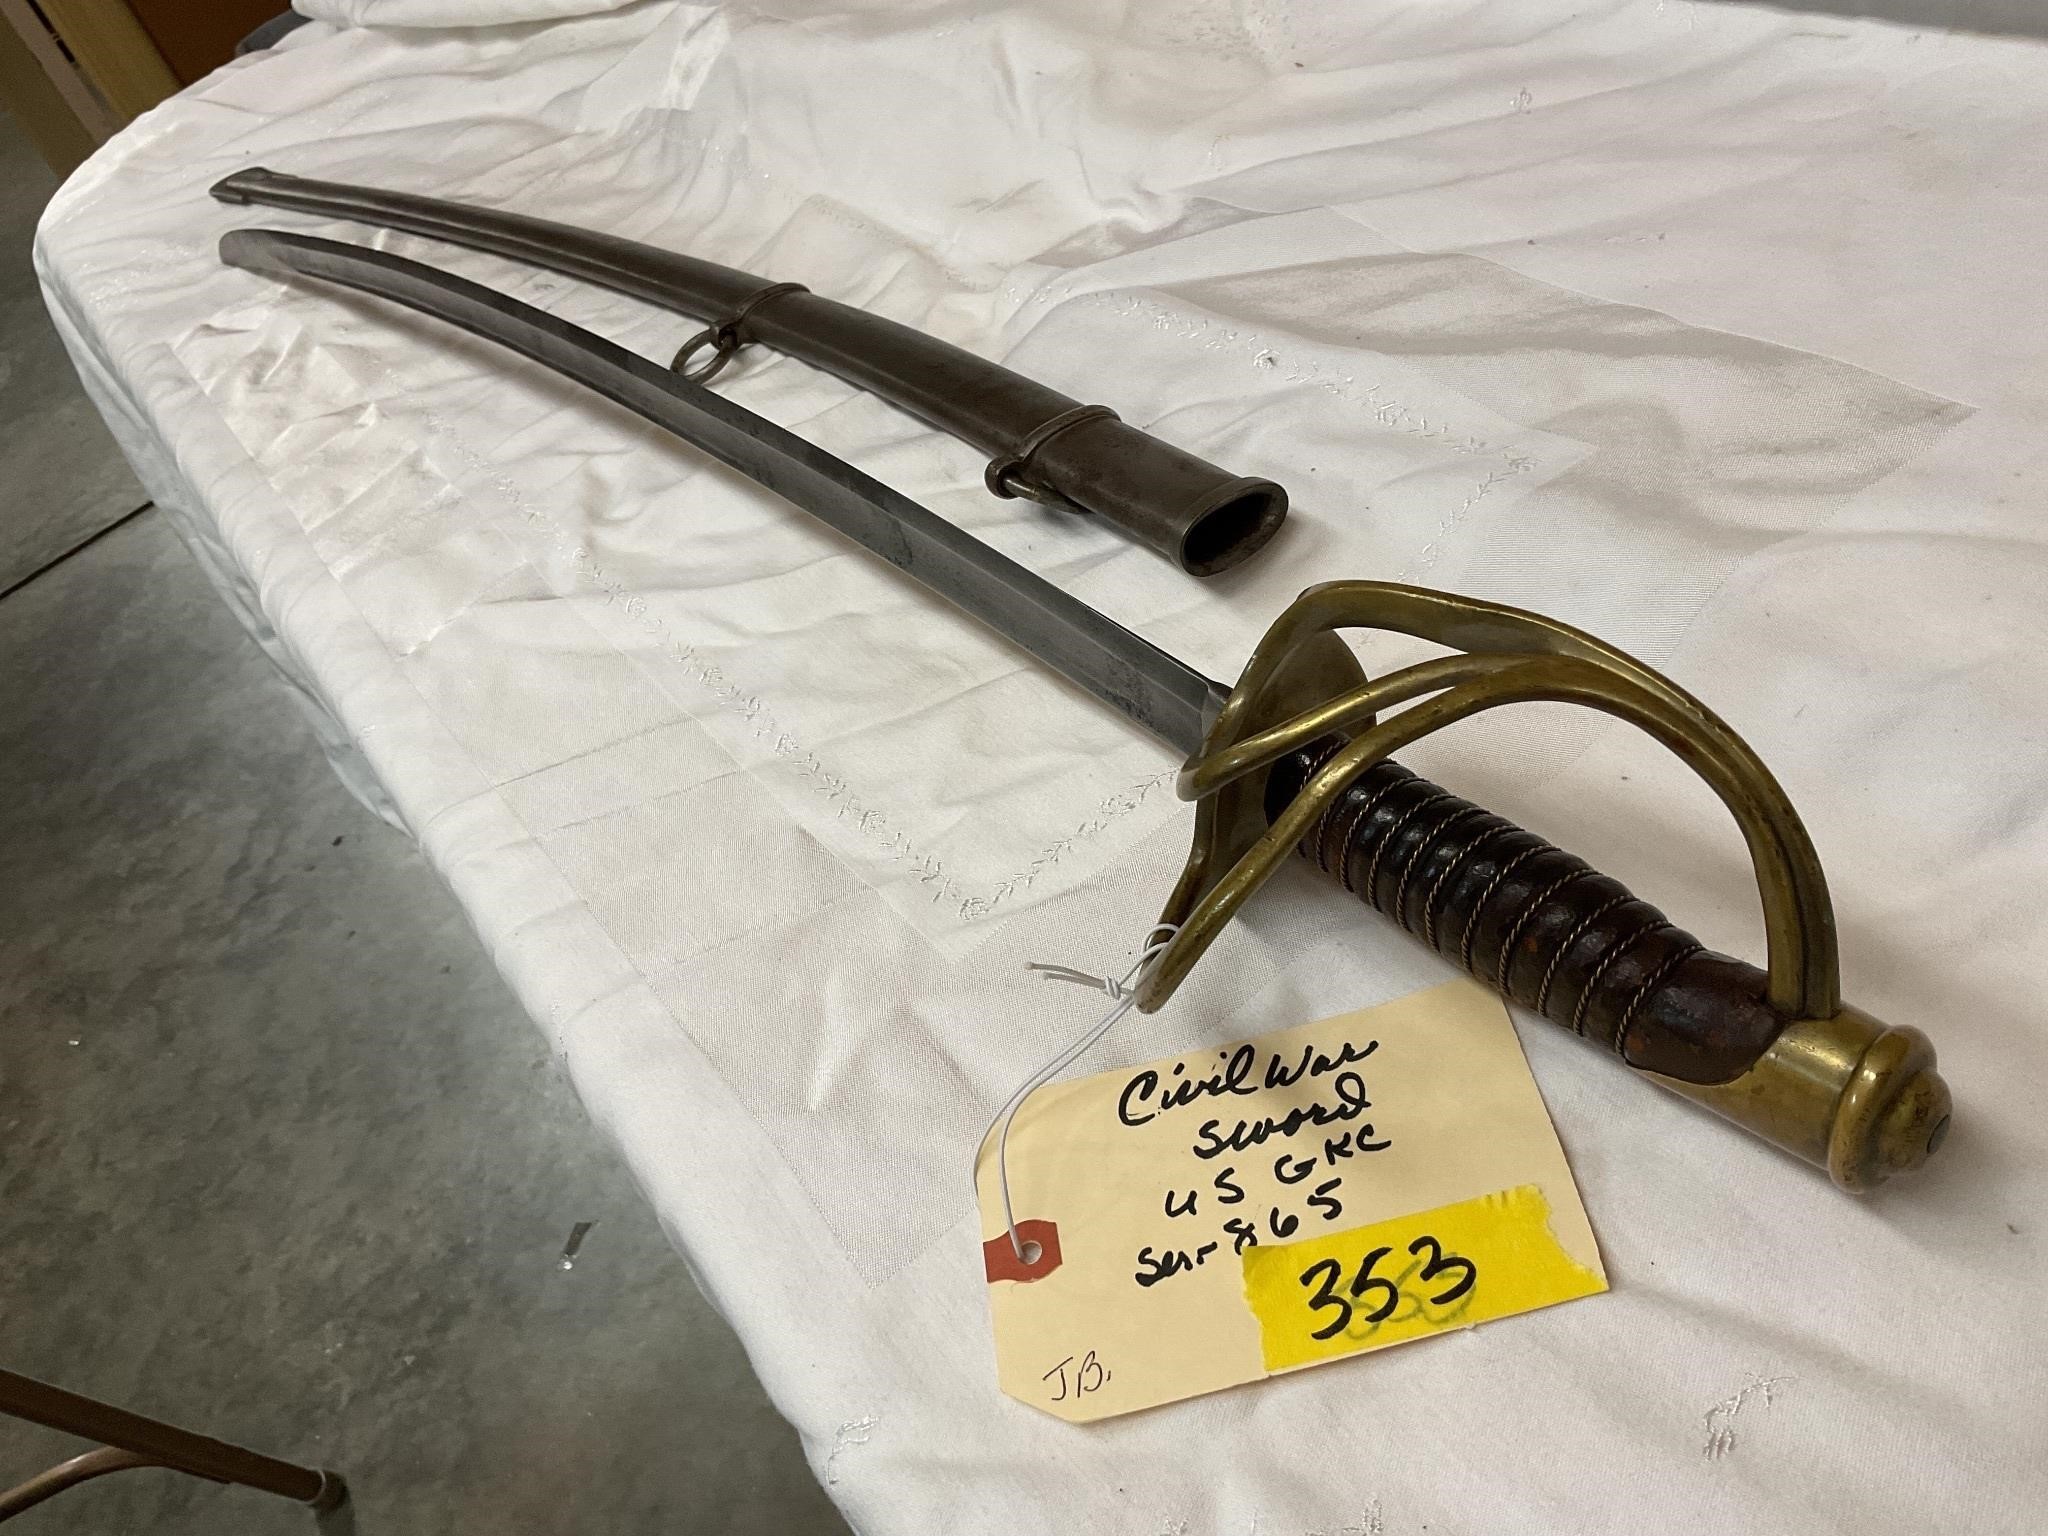 Ames manufacturing us 1865 sword